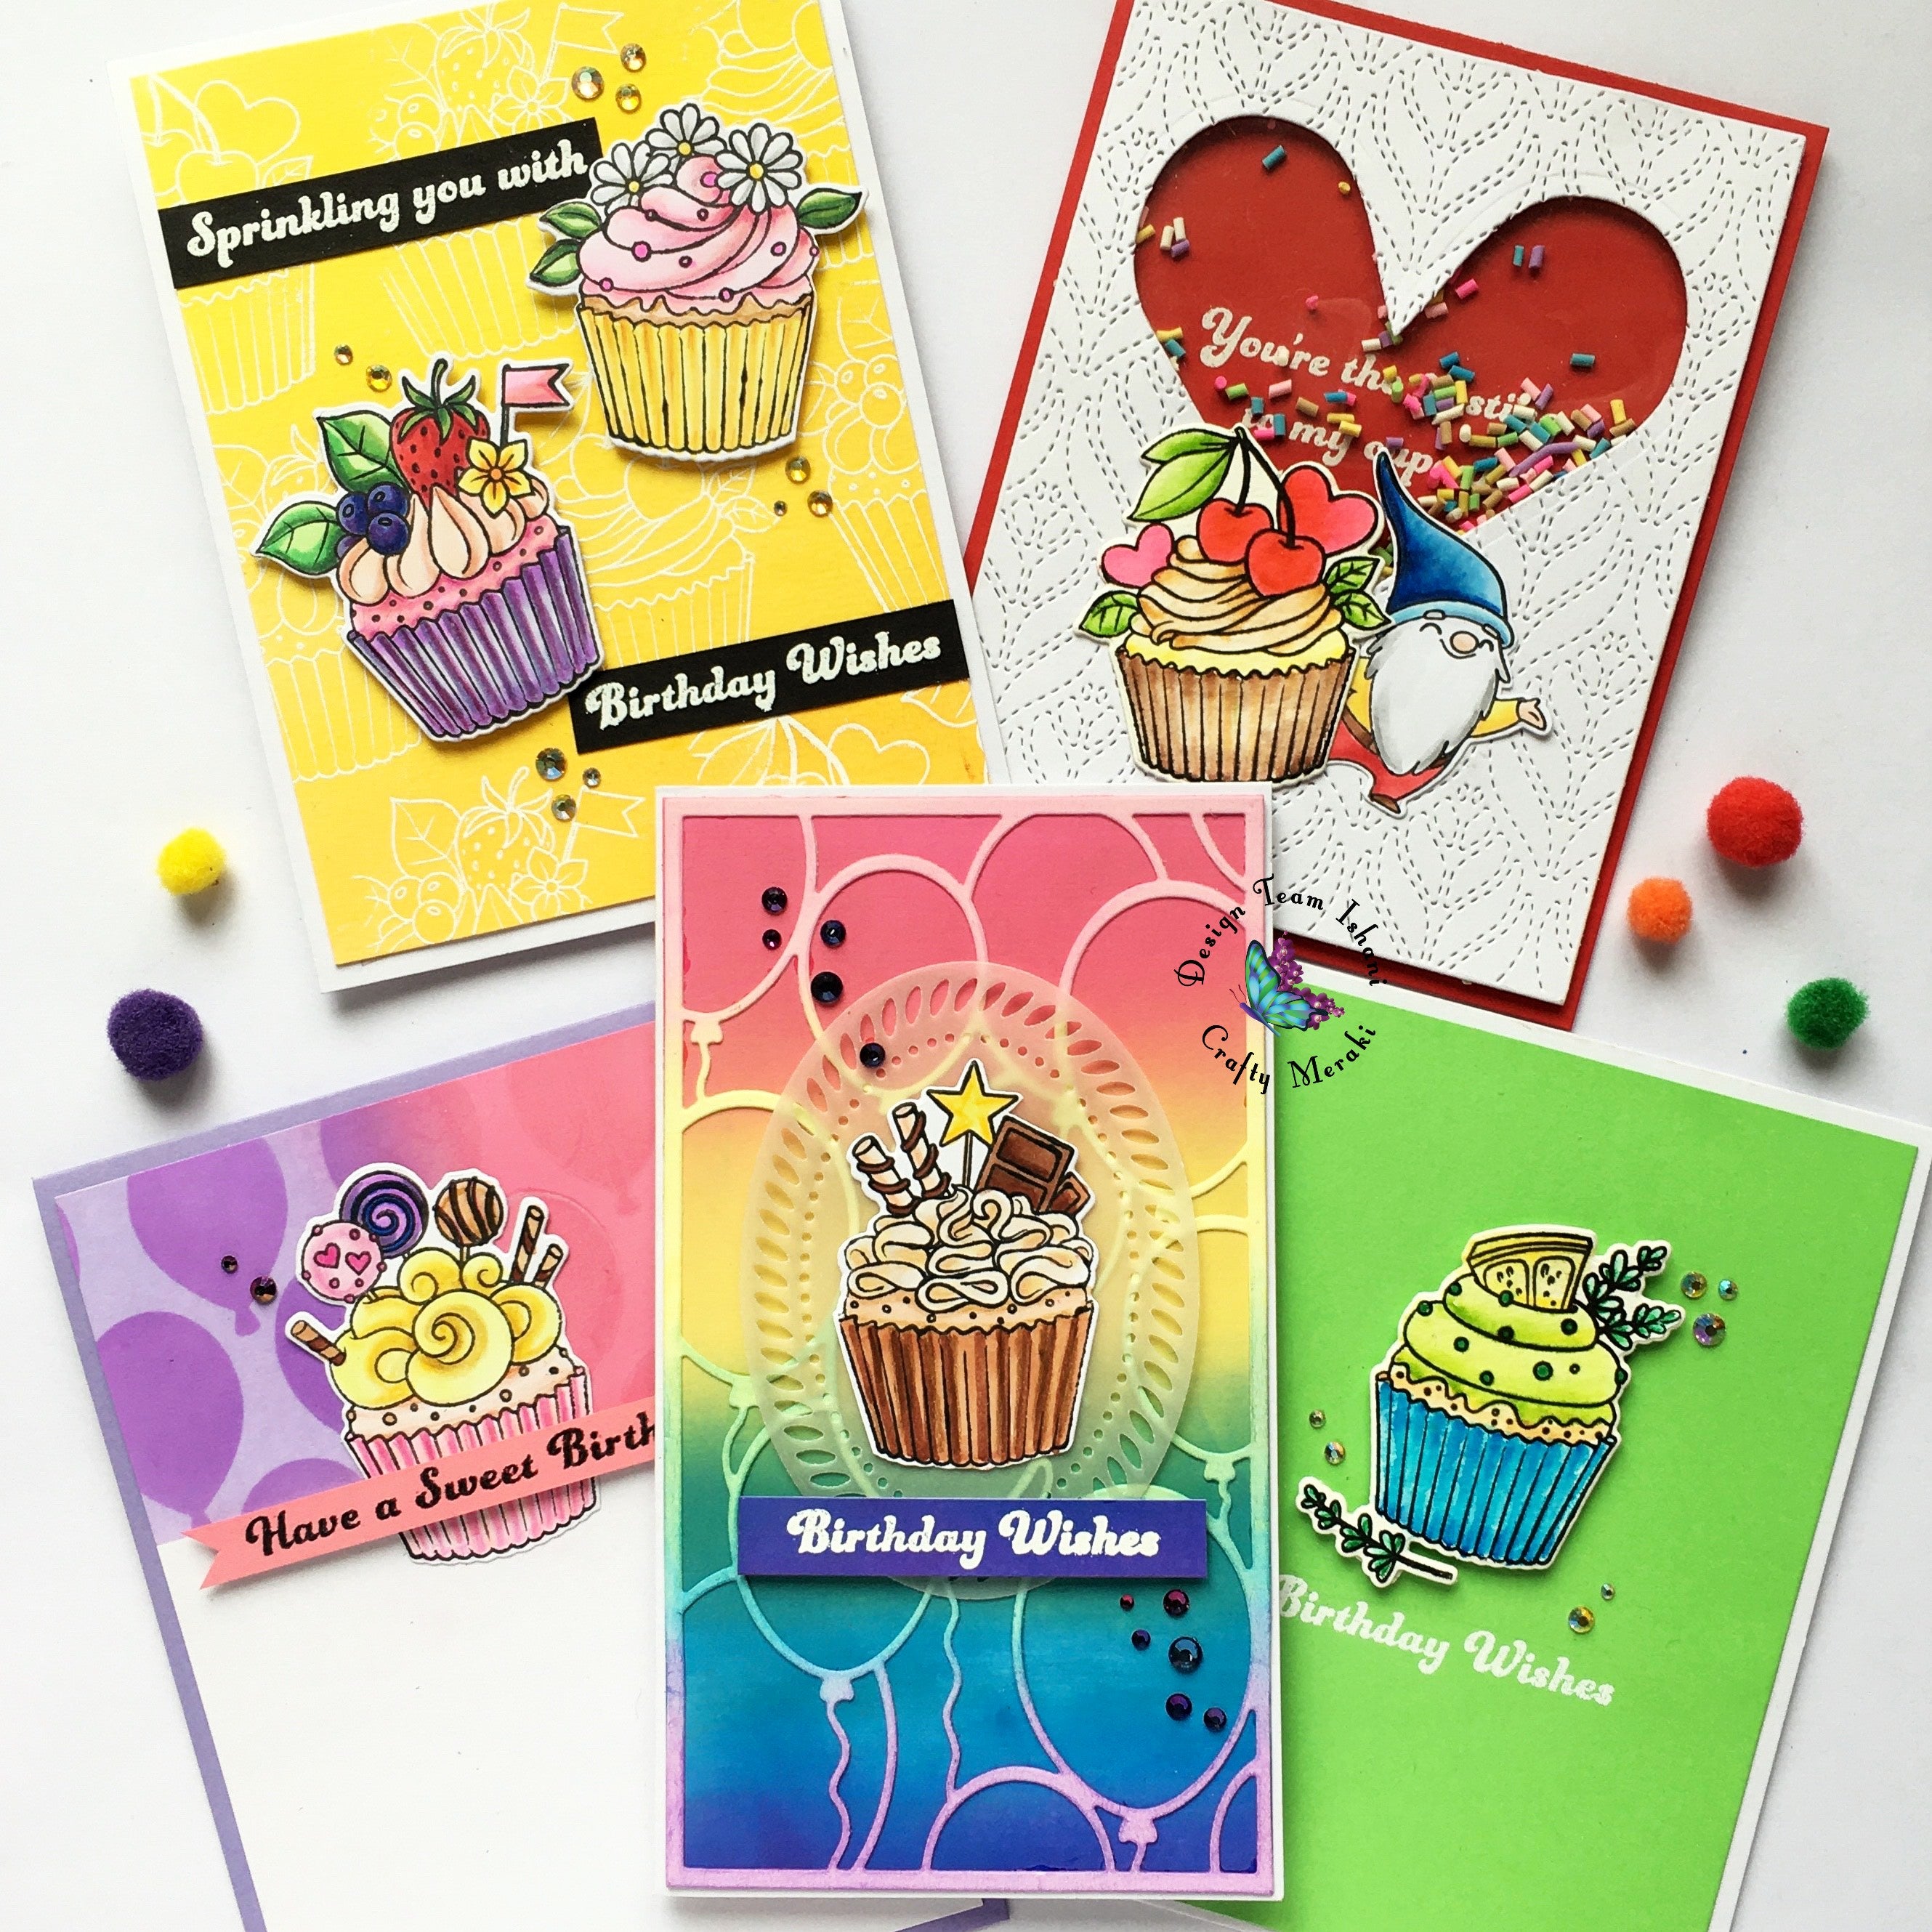 Be your own kind of Cupcake stamp set